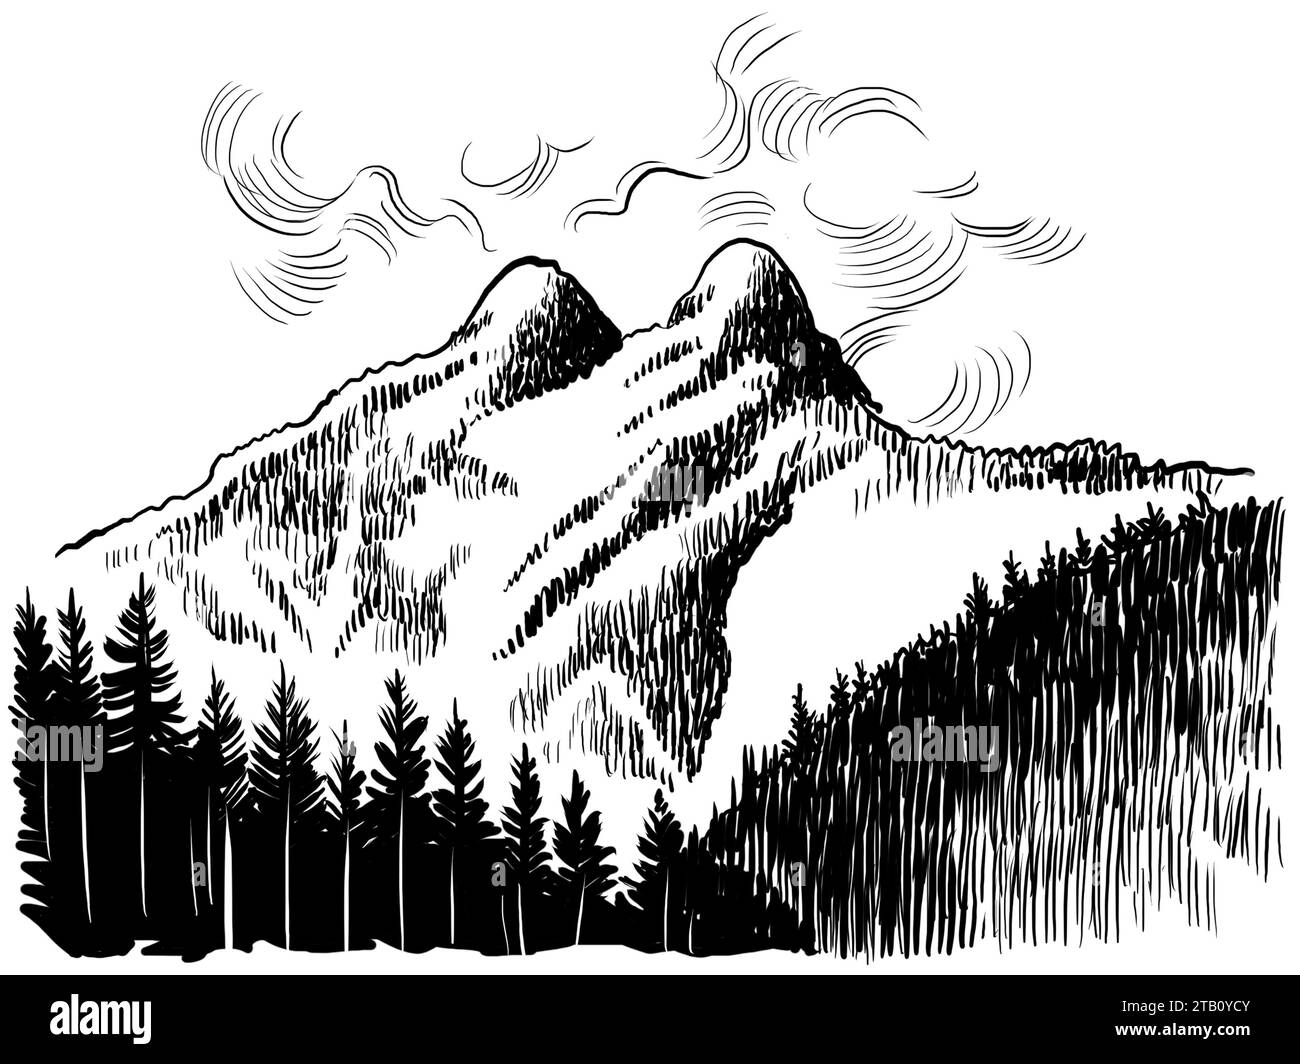 Lions mountain in British Columbia, Canada. Hand-drawn black and white illustration Stock Photo